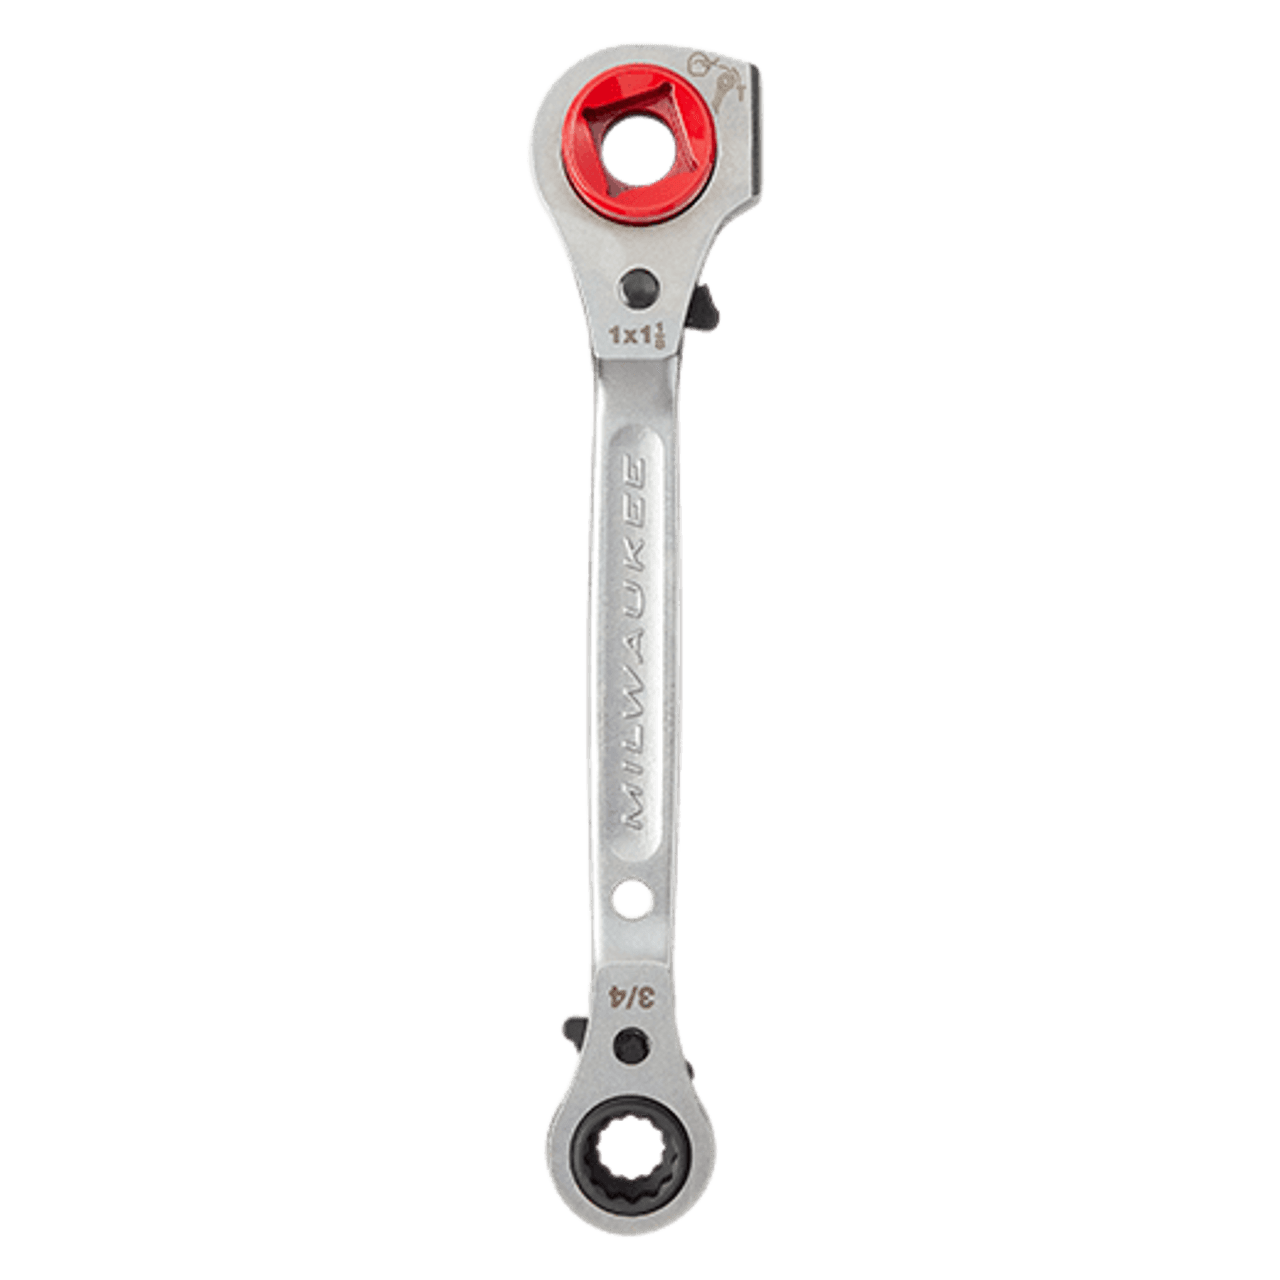 Lineman's 5in1 Ratcheting Wrench